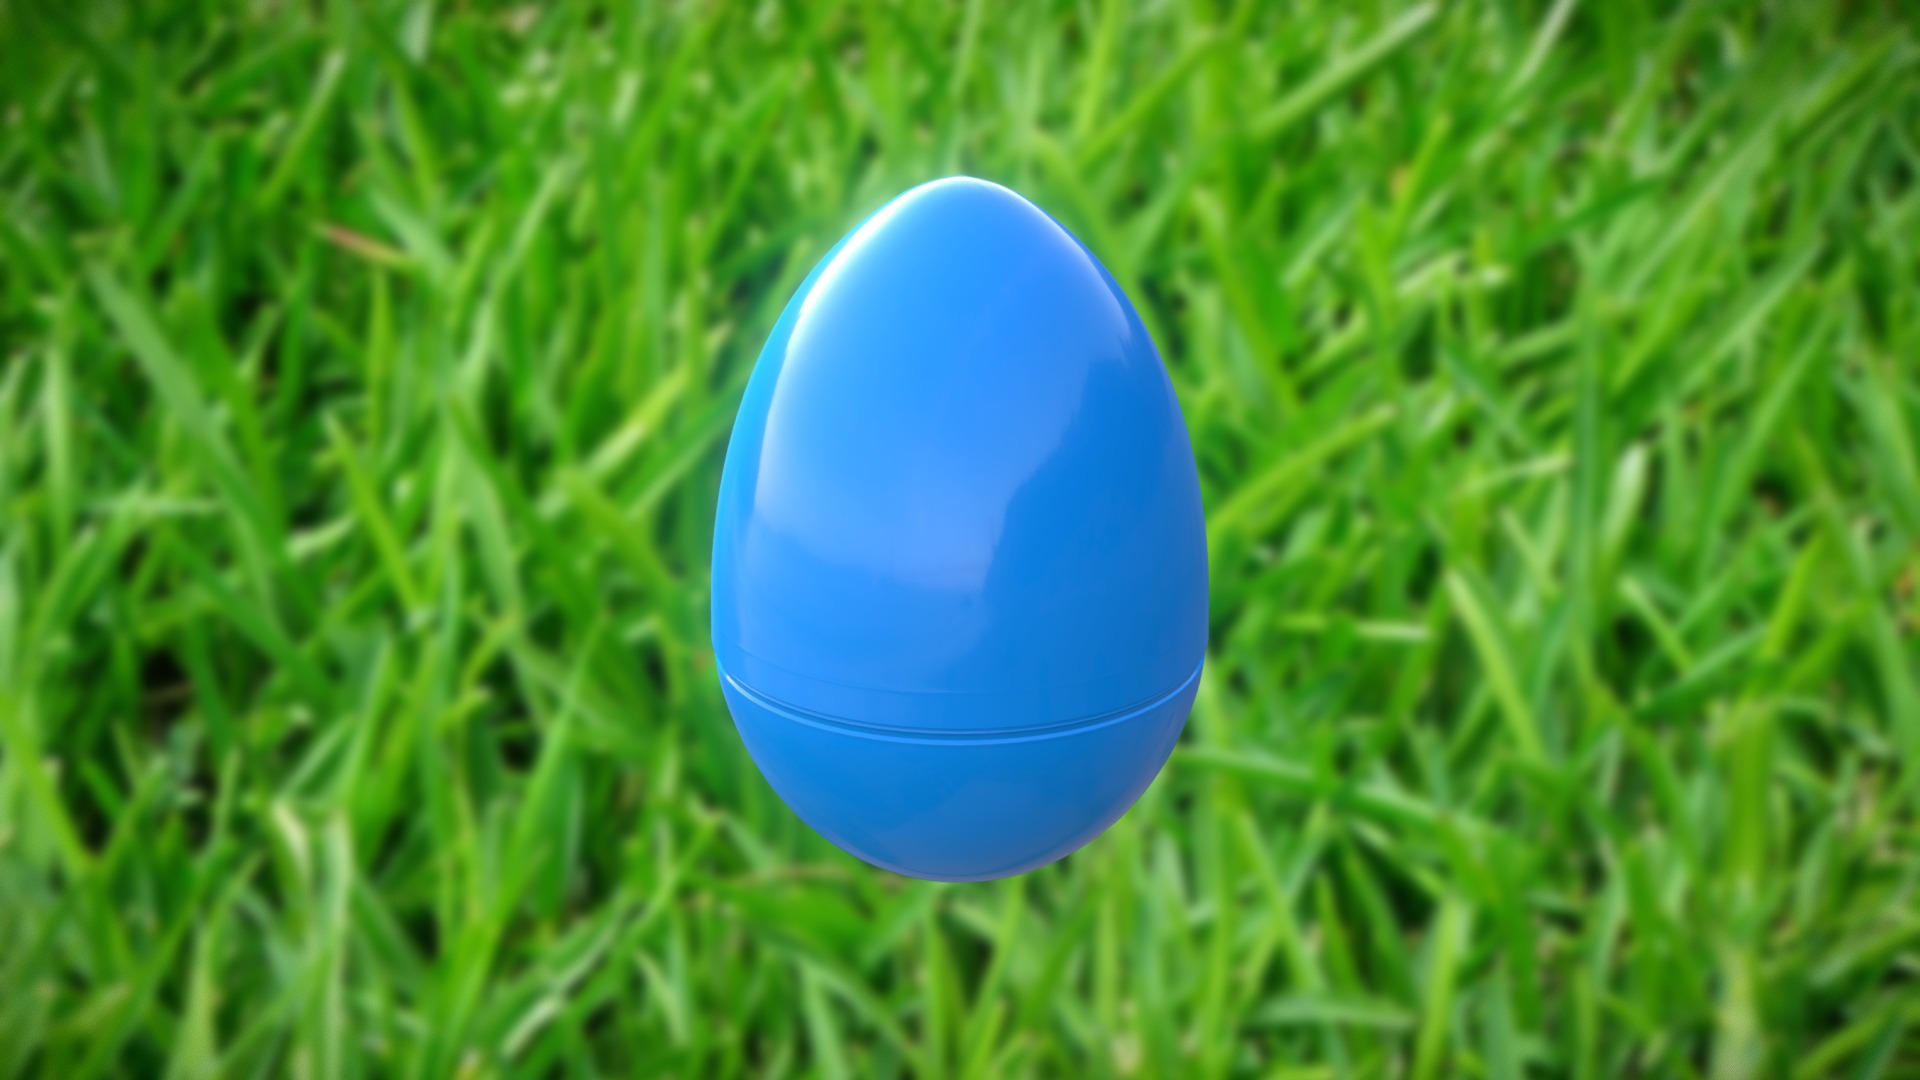 3D model Plastic Easter Egg - This is a 3D model of the Plastic Easter Egg. The 3D model is about a blue ball in the grass.